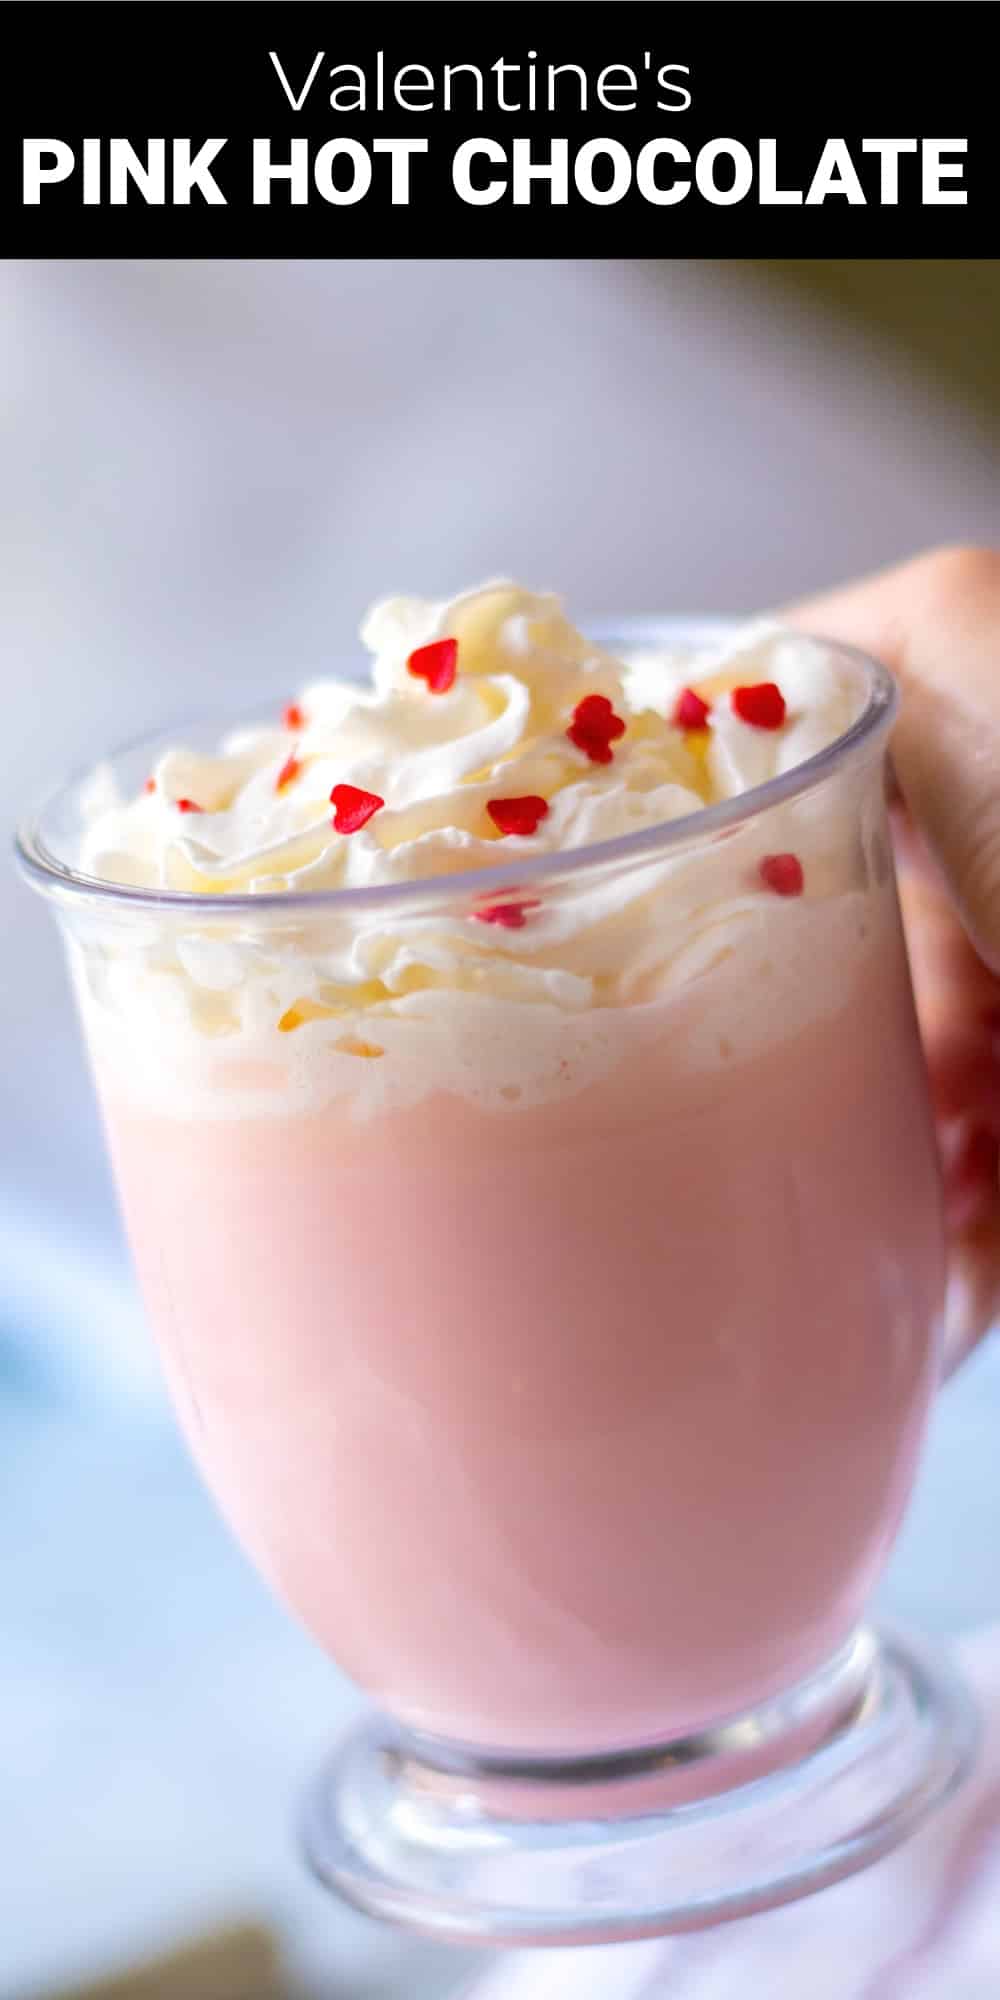 This pink hot chocolate is a pretty and festive version of the popular drink that’s just perfect for Valentine’s Day. It not only has a fun pink color and a delicious creamy taste, but it’s also incredibly quick and easy to make.